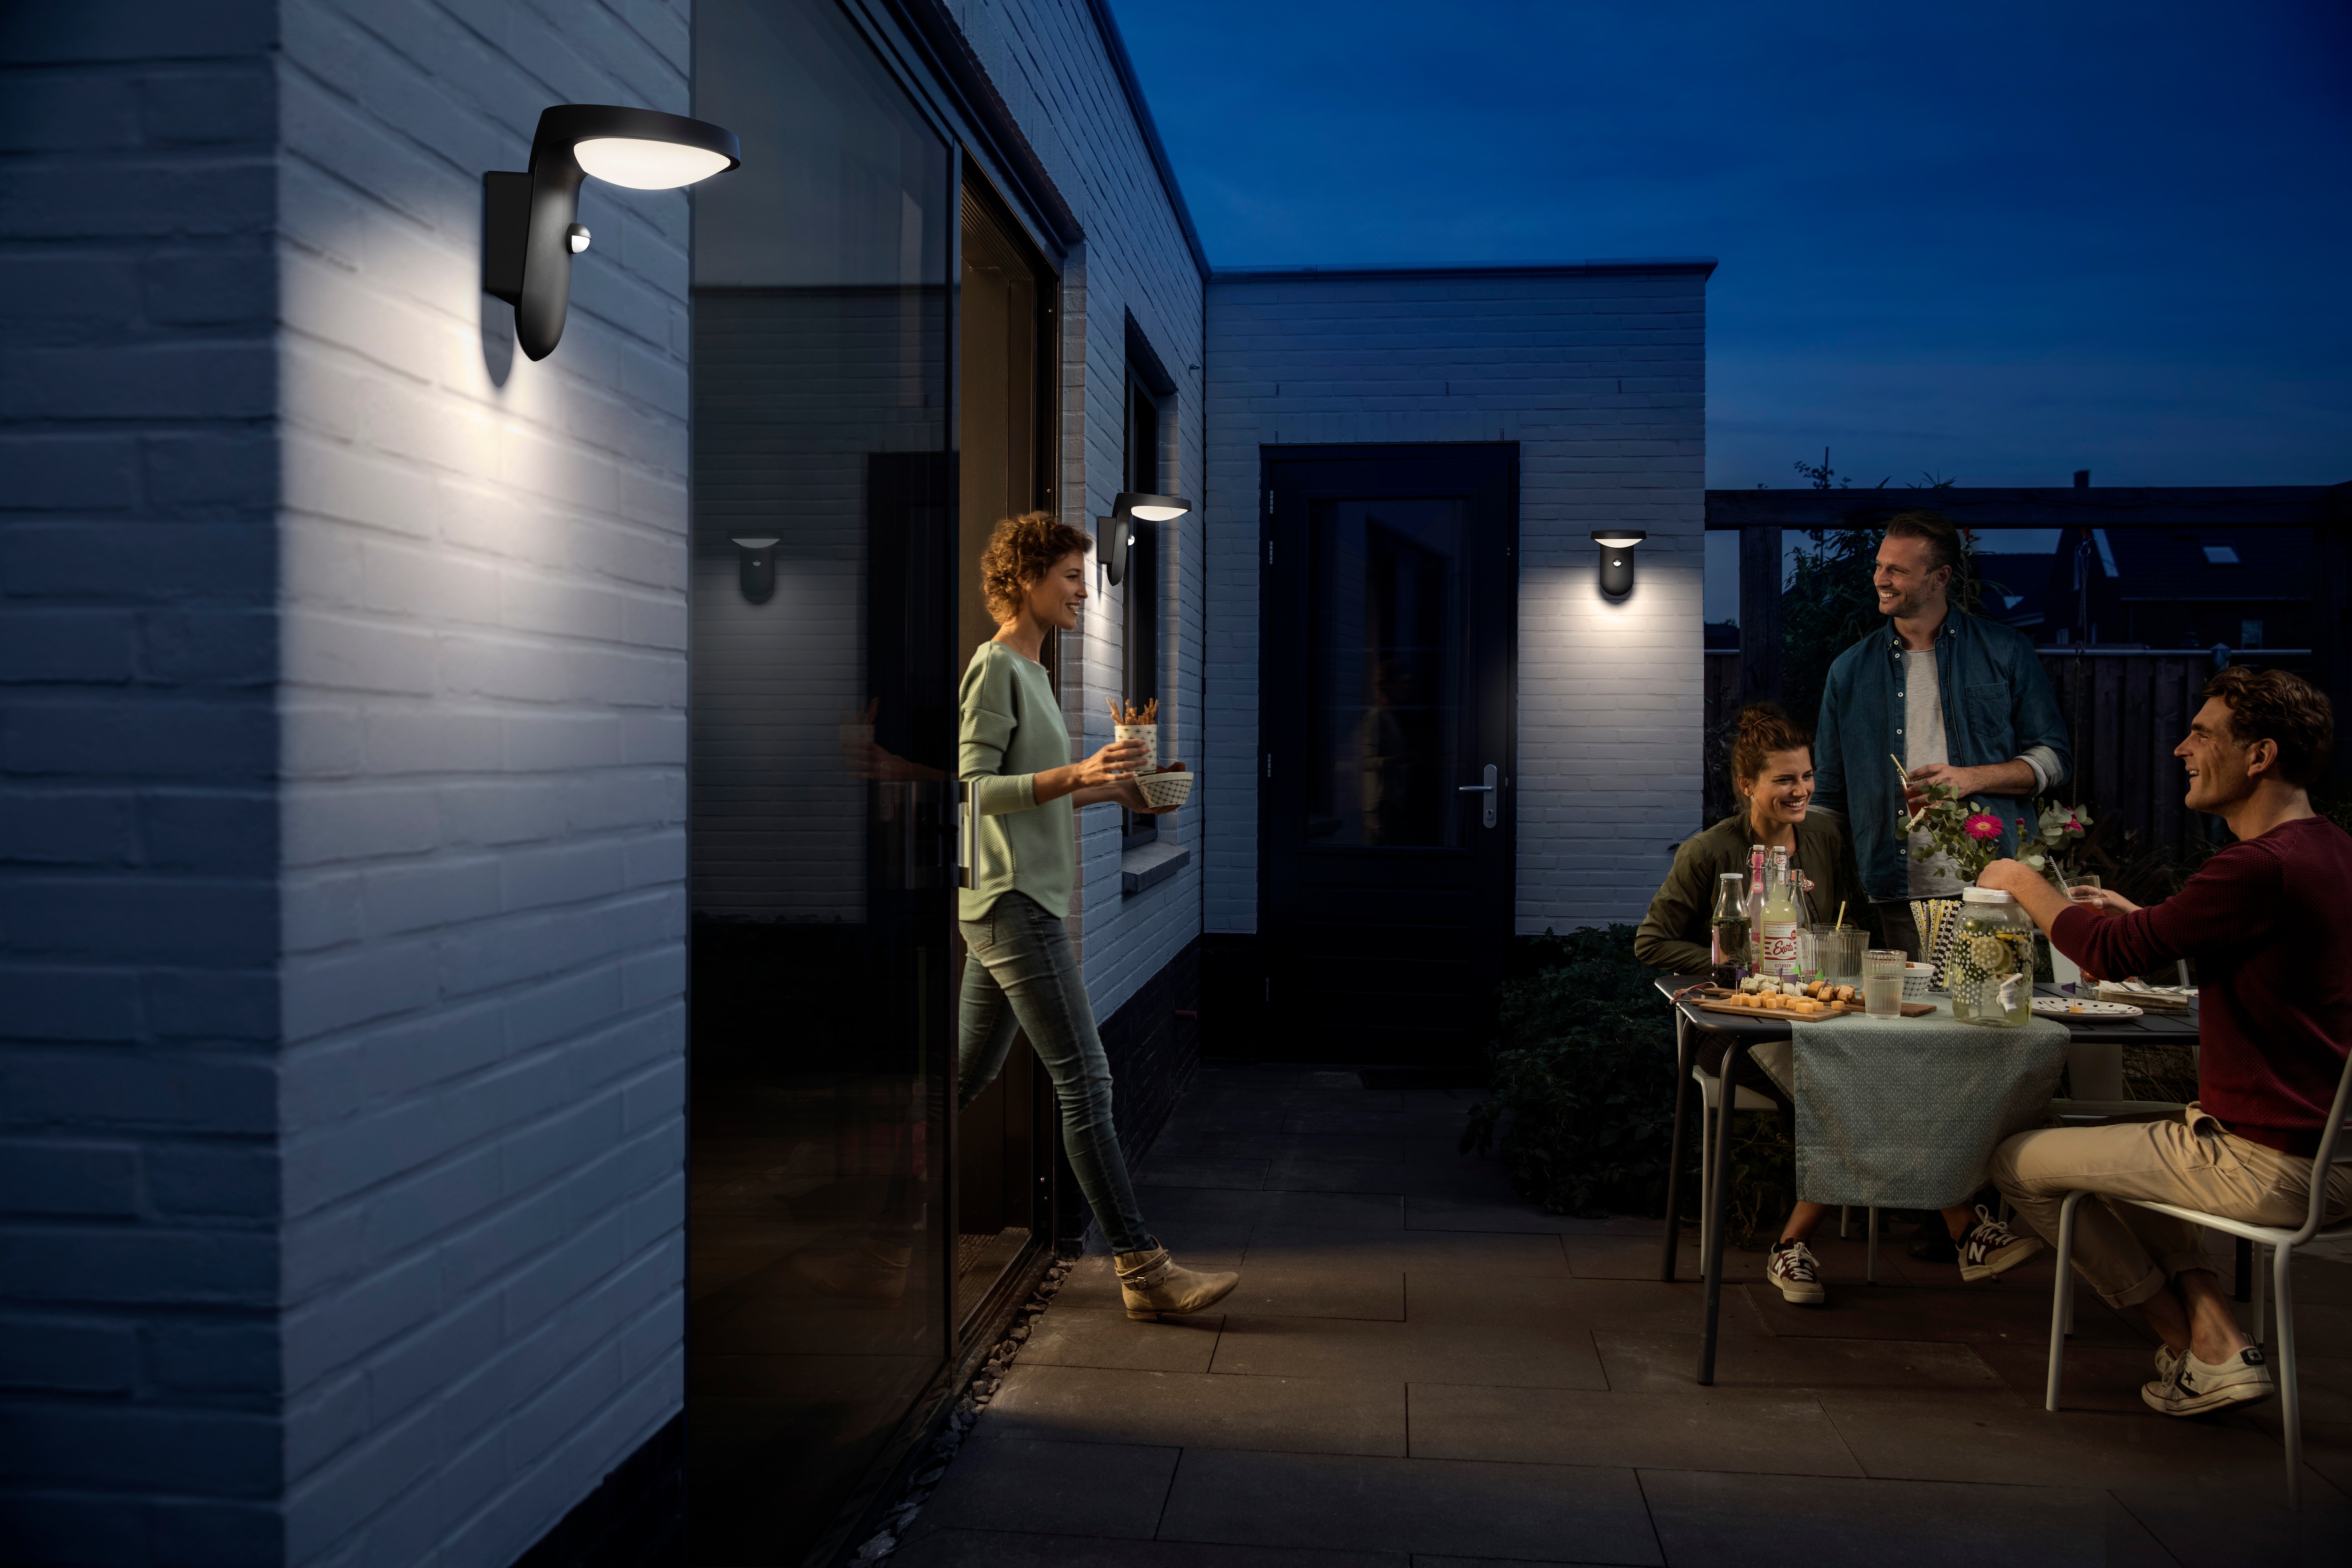 https://www.signify.com/content/dam/signify/en-aa/about/news/2023/20230607-philips-led-outdoor-lights-combine/philips-led-outdoor-ultraefficient-solar-tyla-wall-light-lifestyle.jpg